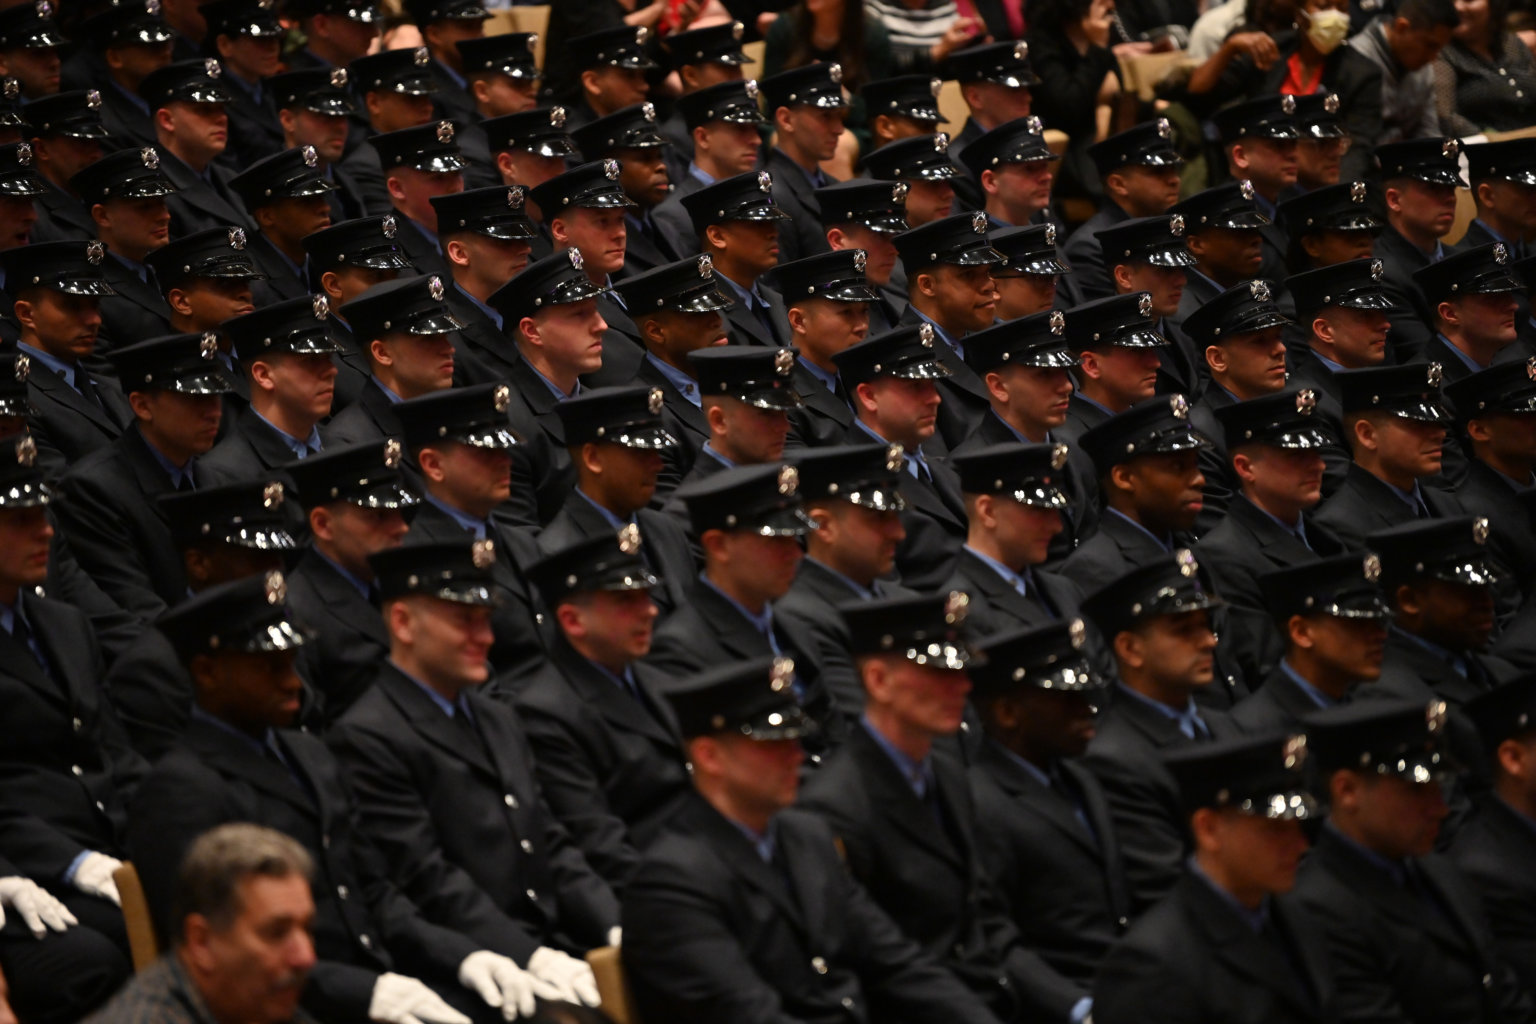 FDNY new class of probationary firefighters in Brooklyn